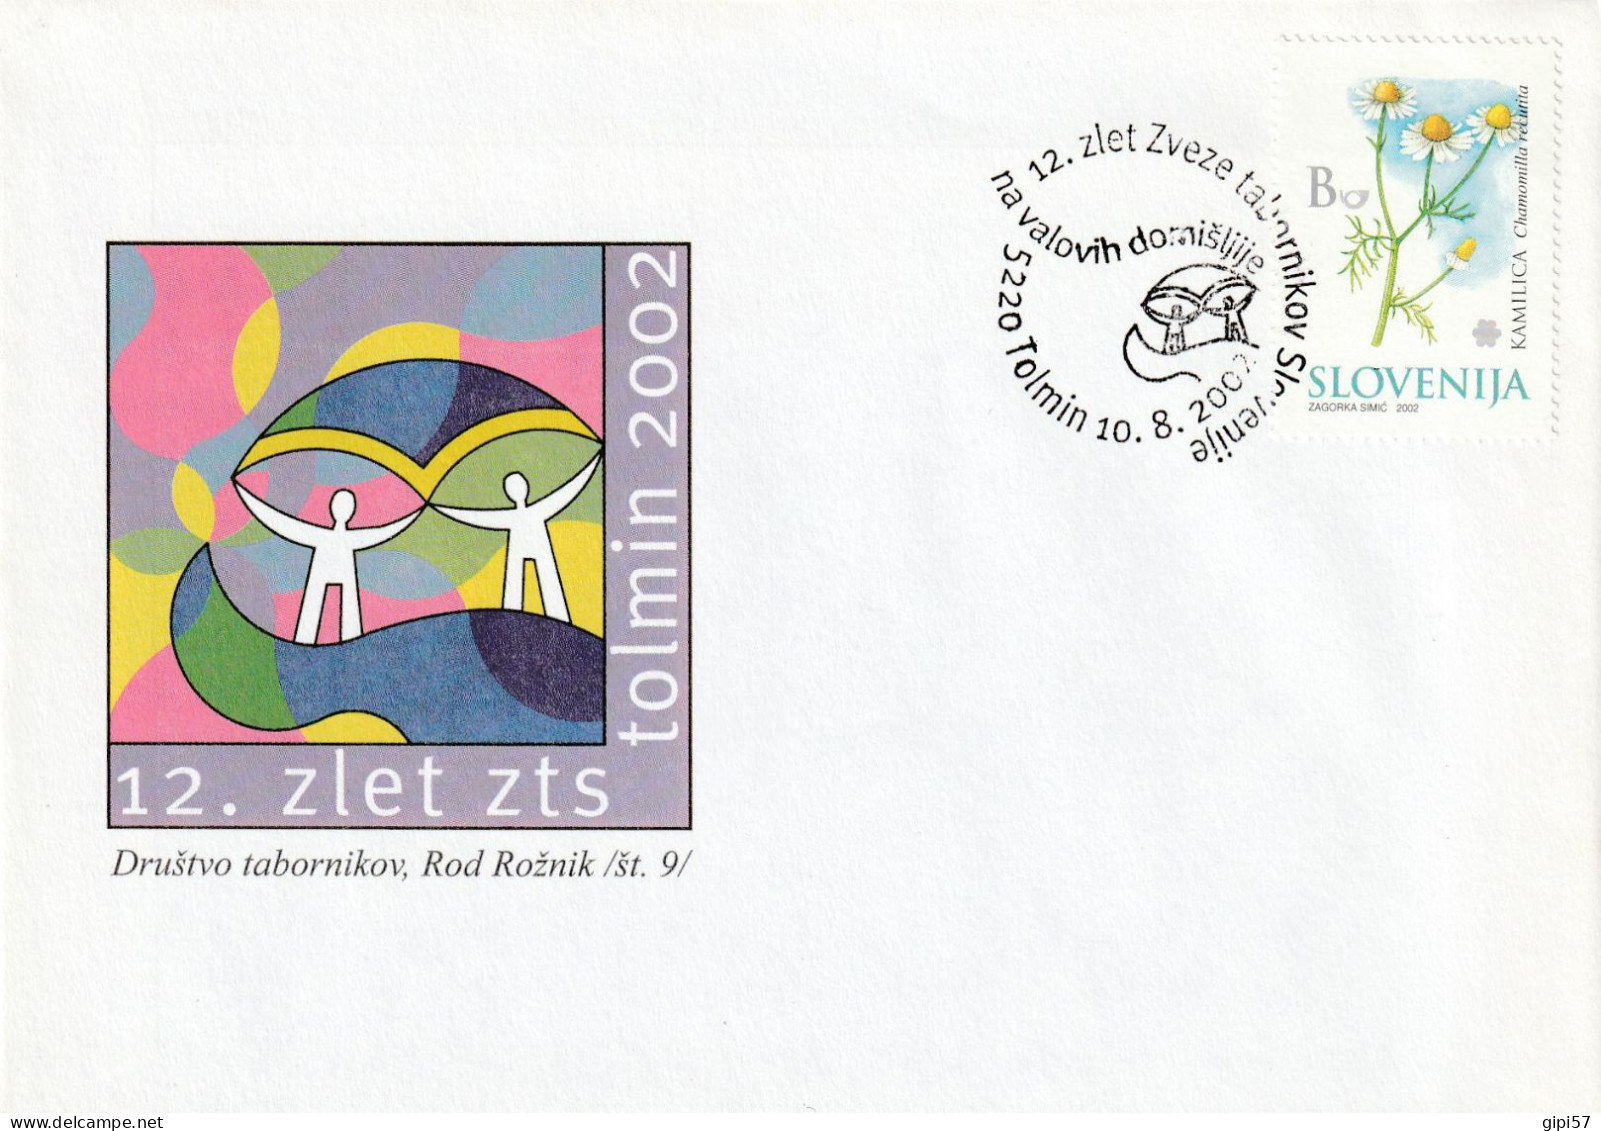 SCOUT SLOVENIA 2007 - FDC 12. FLY ON THE IMMAGINATION. SPECIAL CANCEL TOLMIN - Slovénie